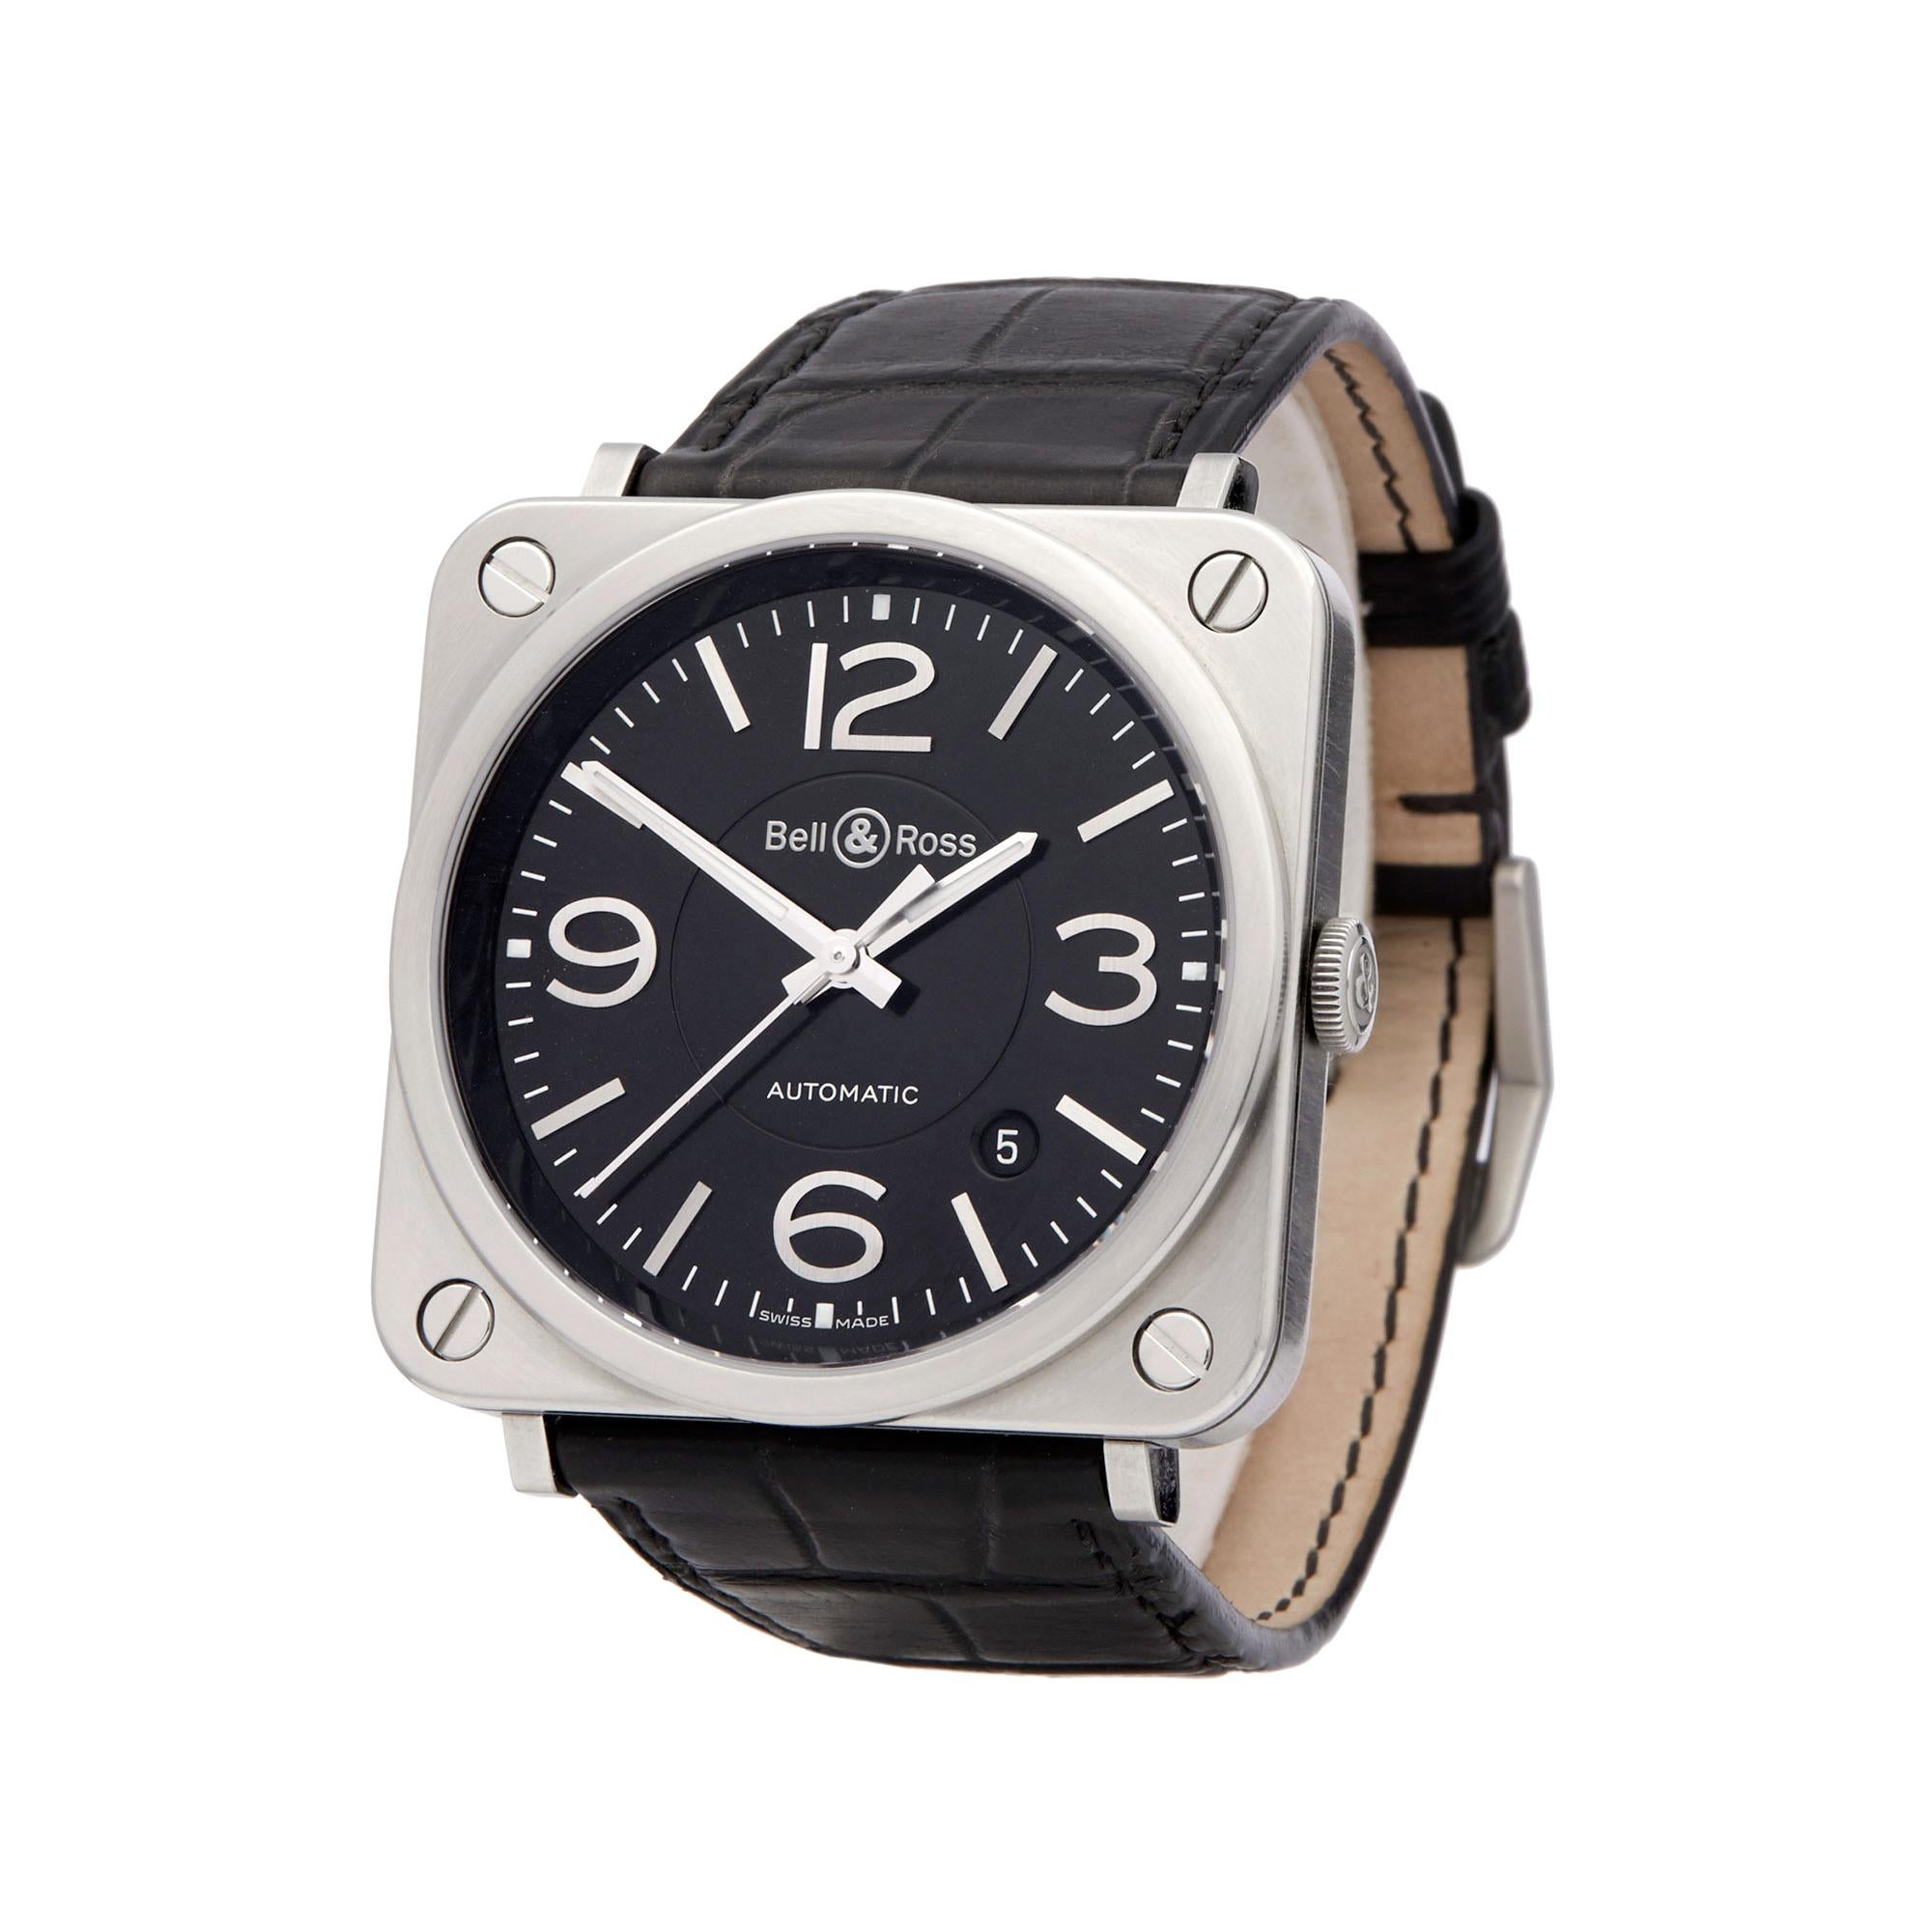 Reference: W5752
Manufacturer: Bell and Ross
Model: BRS-92
Model Reference: BRS-92-BL-ST/SCR
Age: Circa 2018
Gender: Men's
Box and Papers: Box, Manuals and Guarantee
Dial: Black Arabic
Glass: Sapphire Crystal
Movement: Automatic
Water Resistance: To